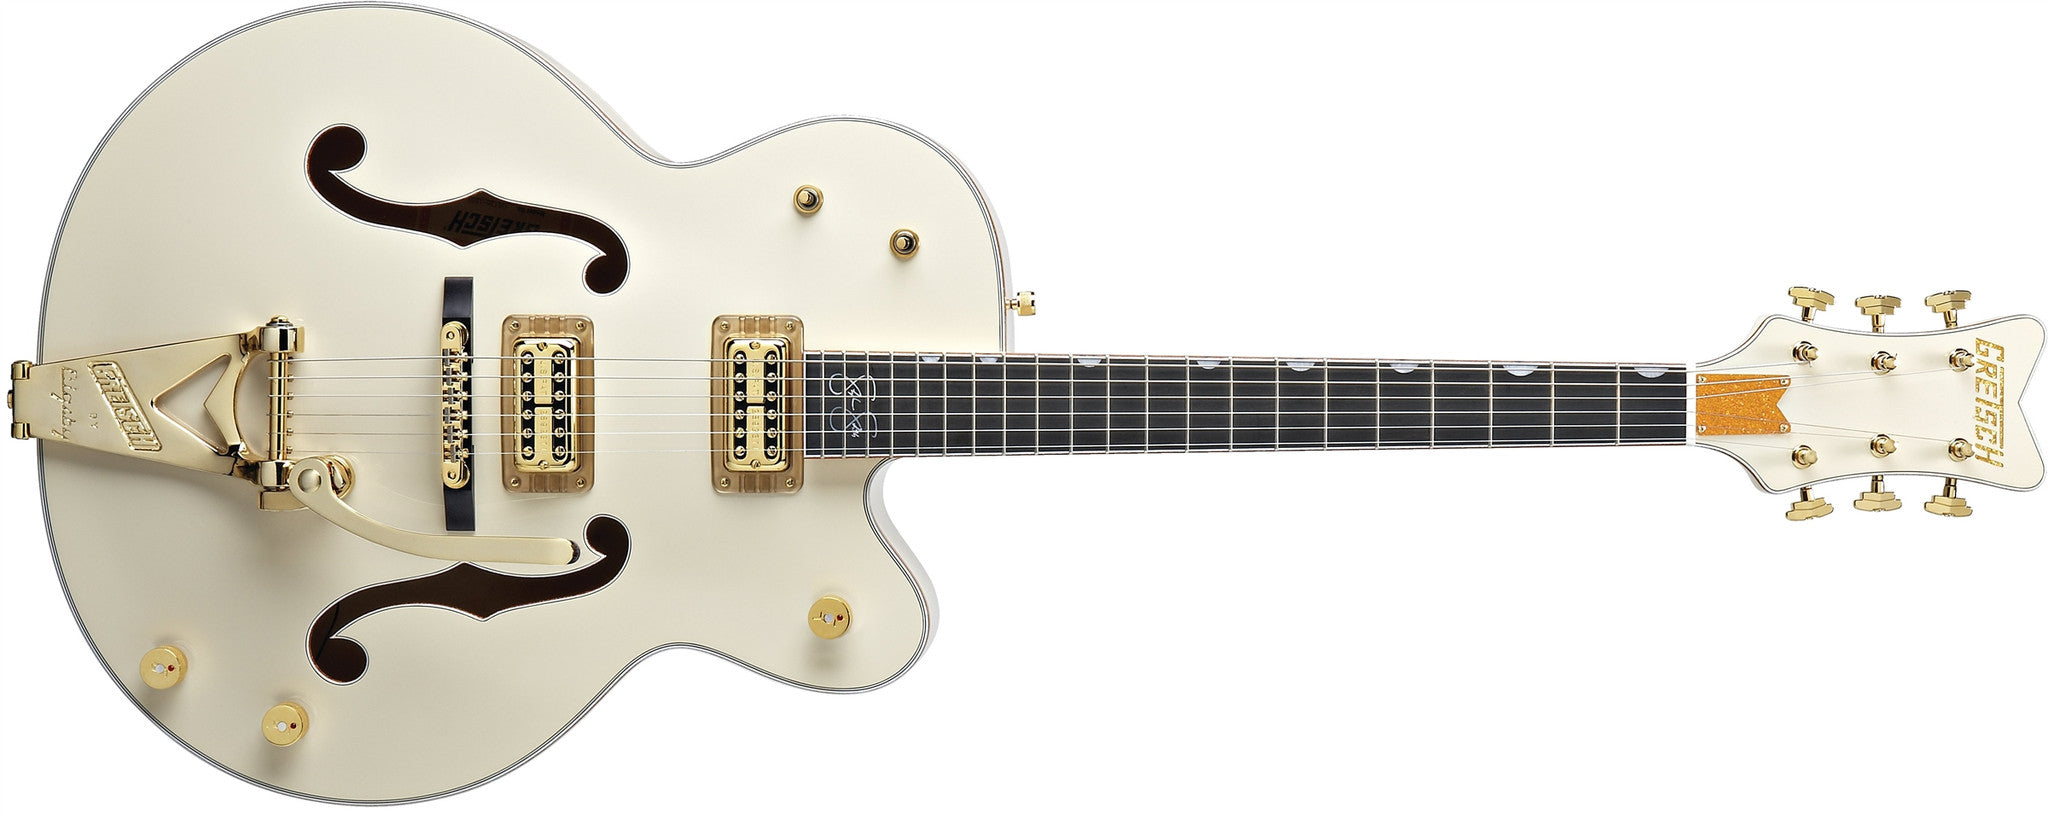 Gretsch G6136-1958 Stephen Stills Signature White Falcon with Bigsby, Ebony Fingerboard, Aged White 2400105841 - L.A. Music - Canada's Favourite Music Store!